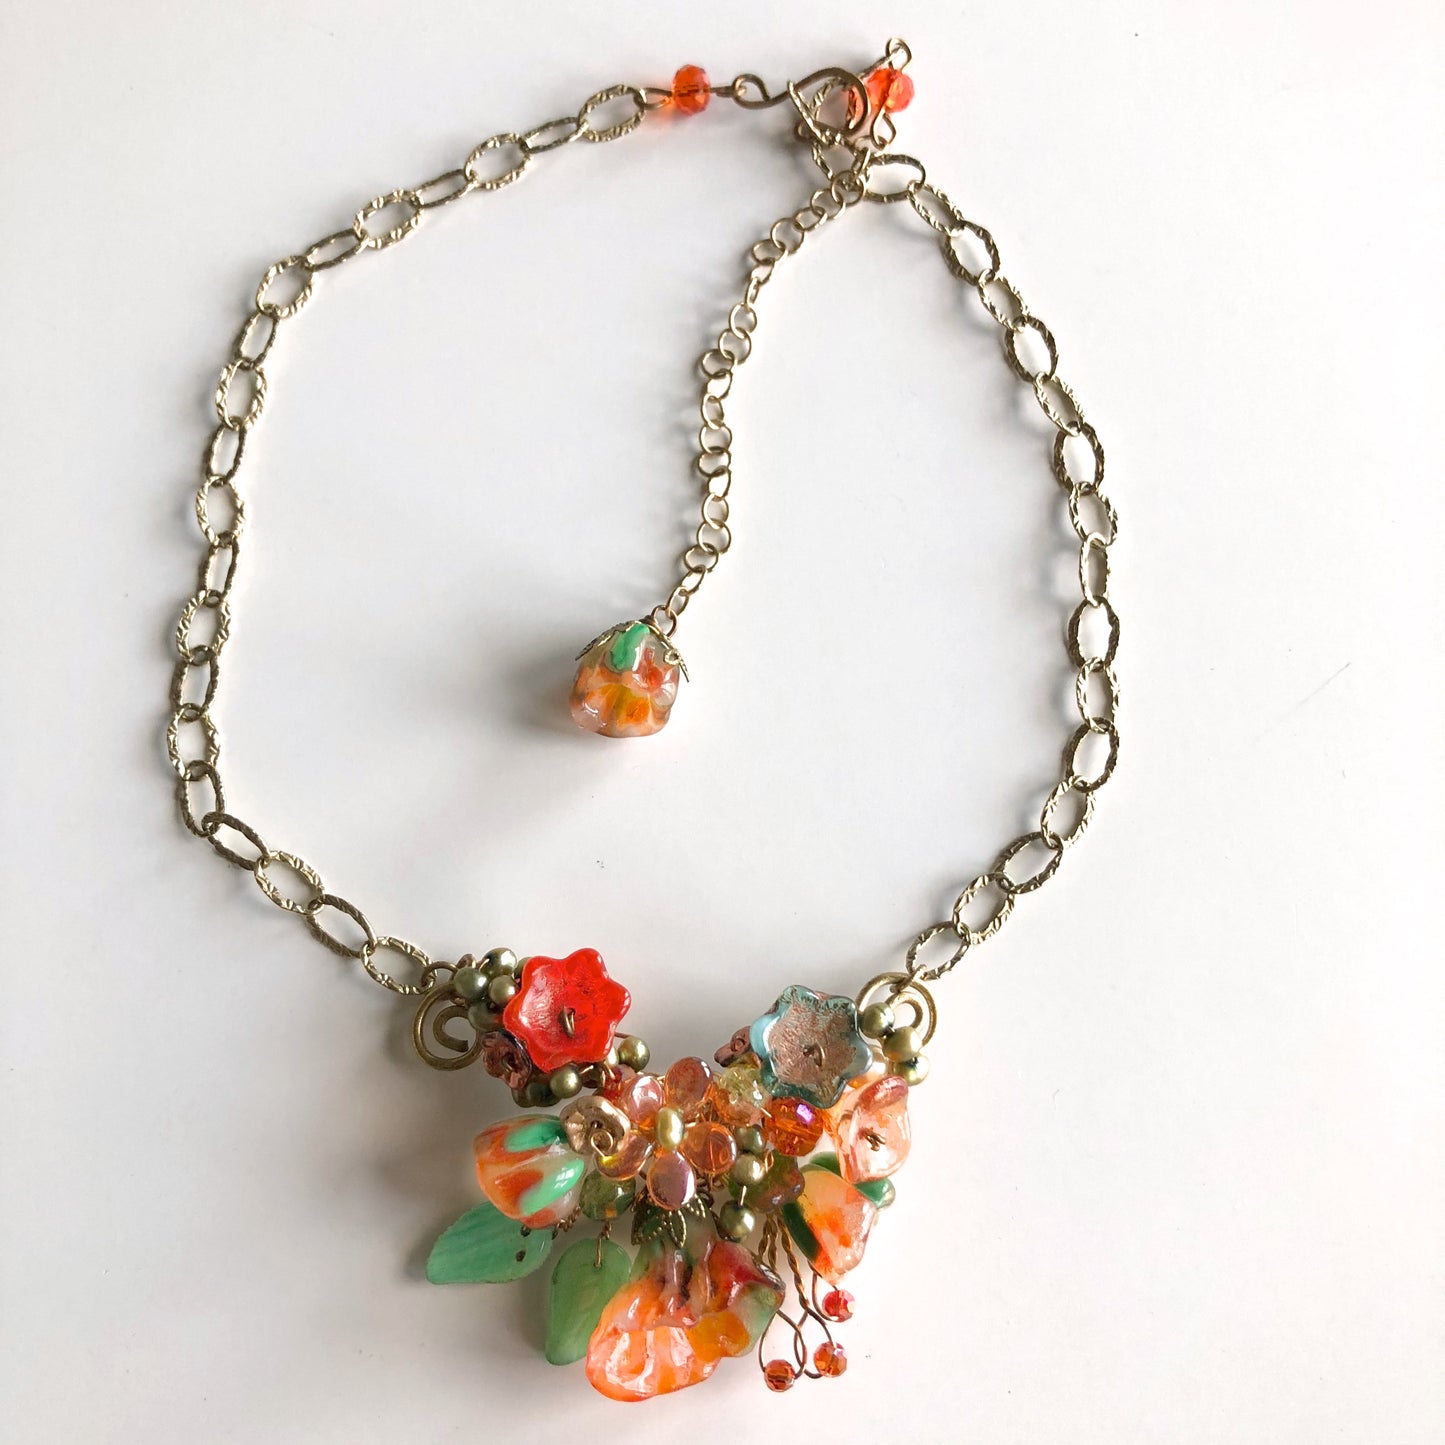 Orange & Teal Gypsy Rose Necklace by Mary Lowe - © Blue Pomegranate Gallery